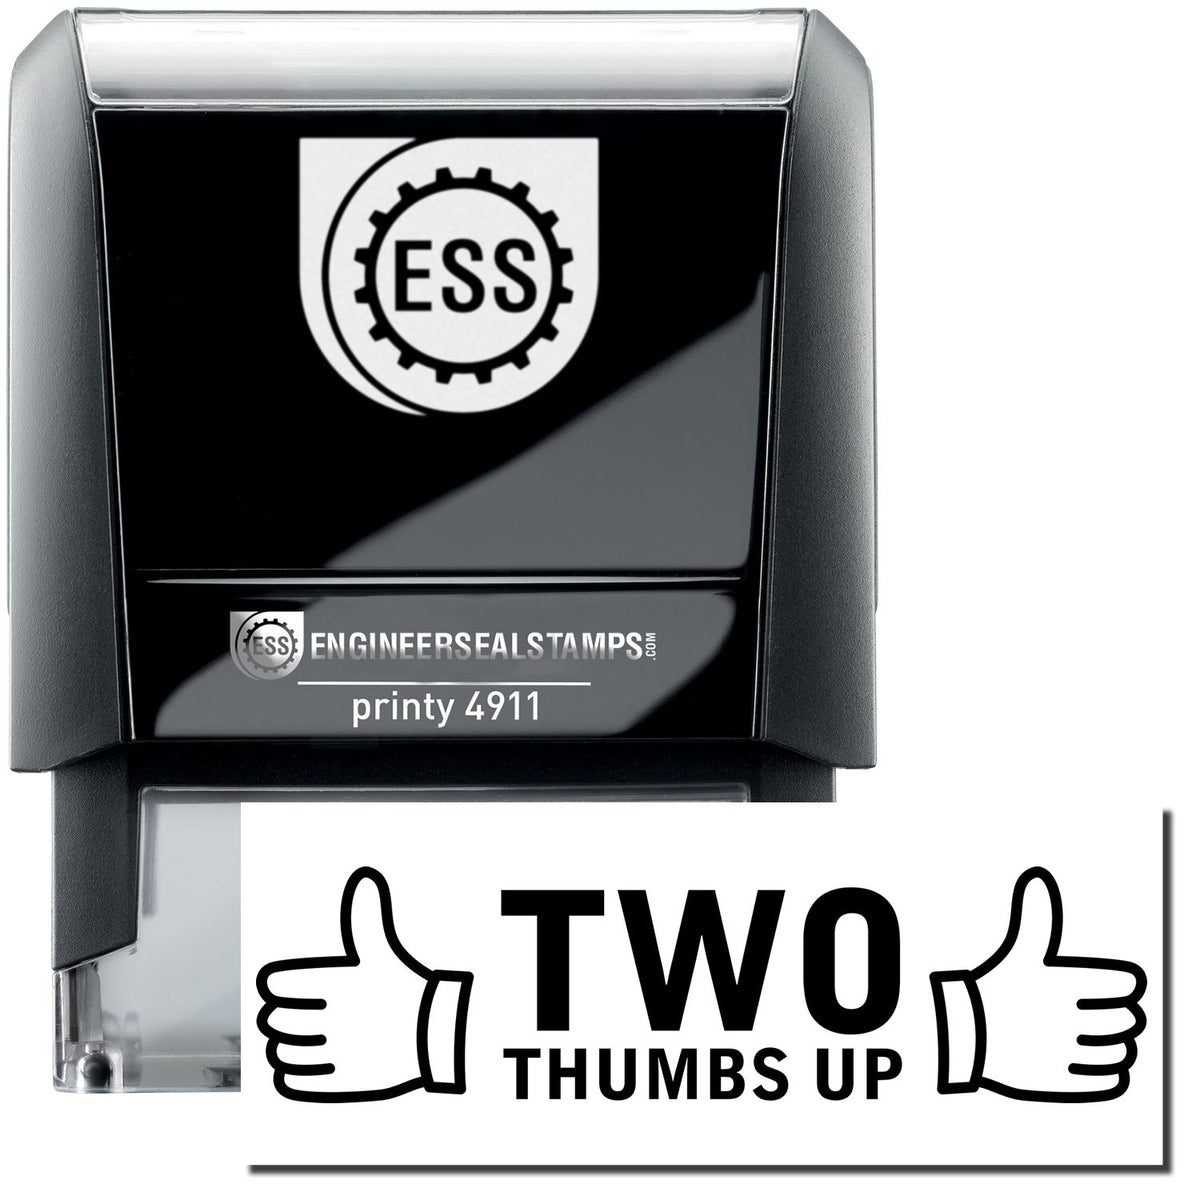 A self-inking stamp with a stamped image showing how the text &quot;TWO THUMBS UP&quot; (&quot;TWO&quot; in a large font and &quot;THUMBS UP&quot; in a small font mentioned underneath with two thumbs pointing up on each side of the text) is displayed after stamping.